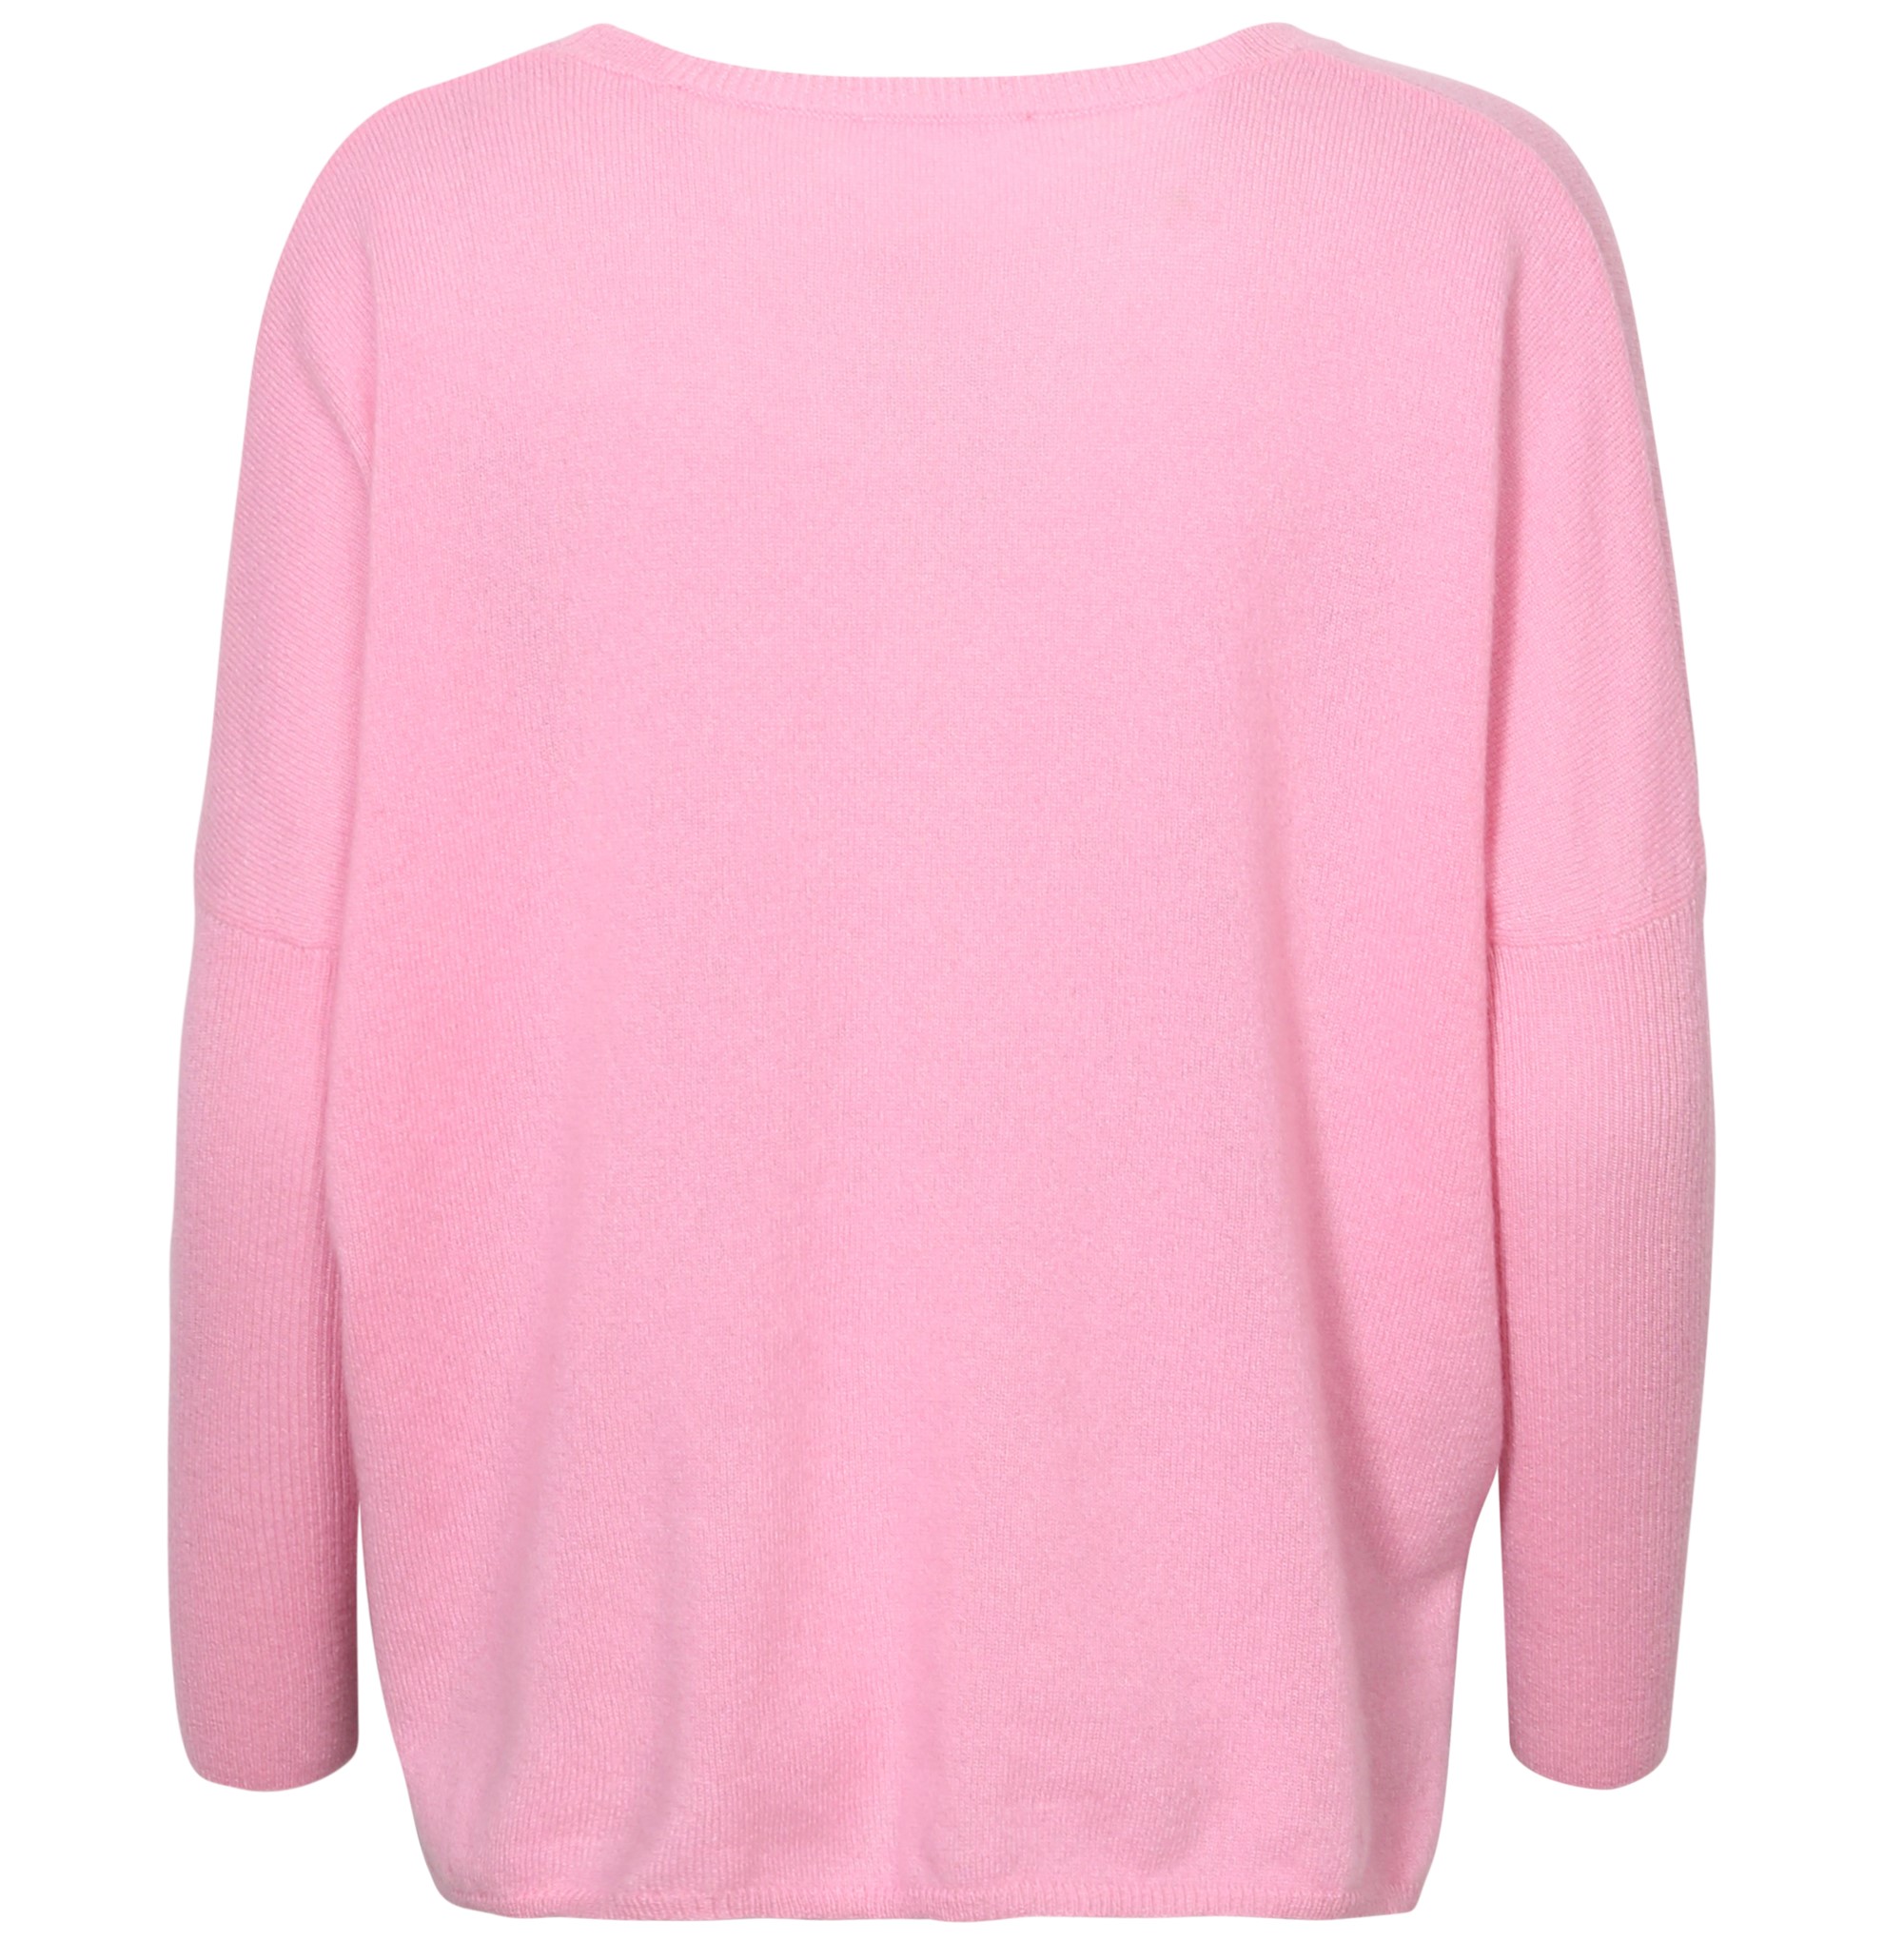 ABSOLUT CASHMERE Poncho Sweater Astrid in Light Pink S